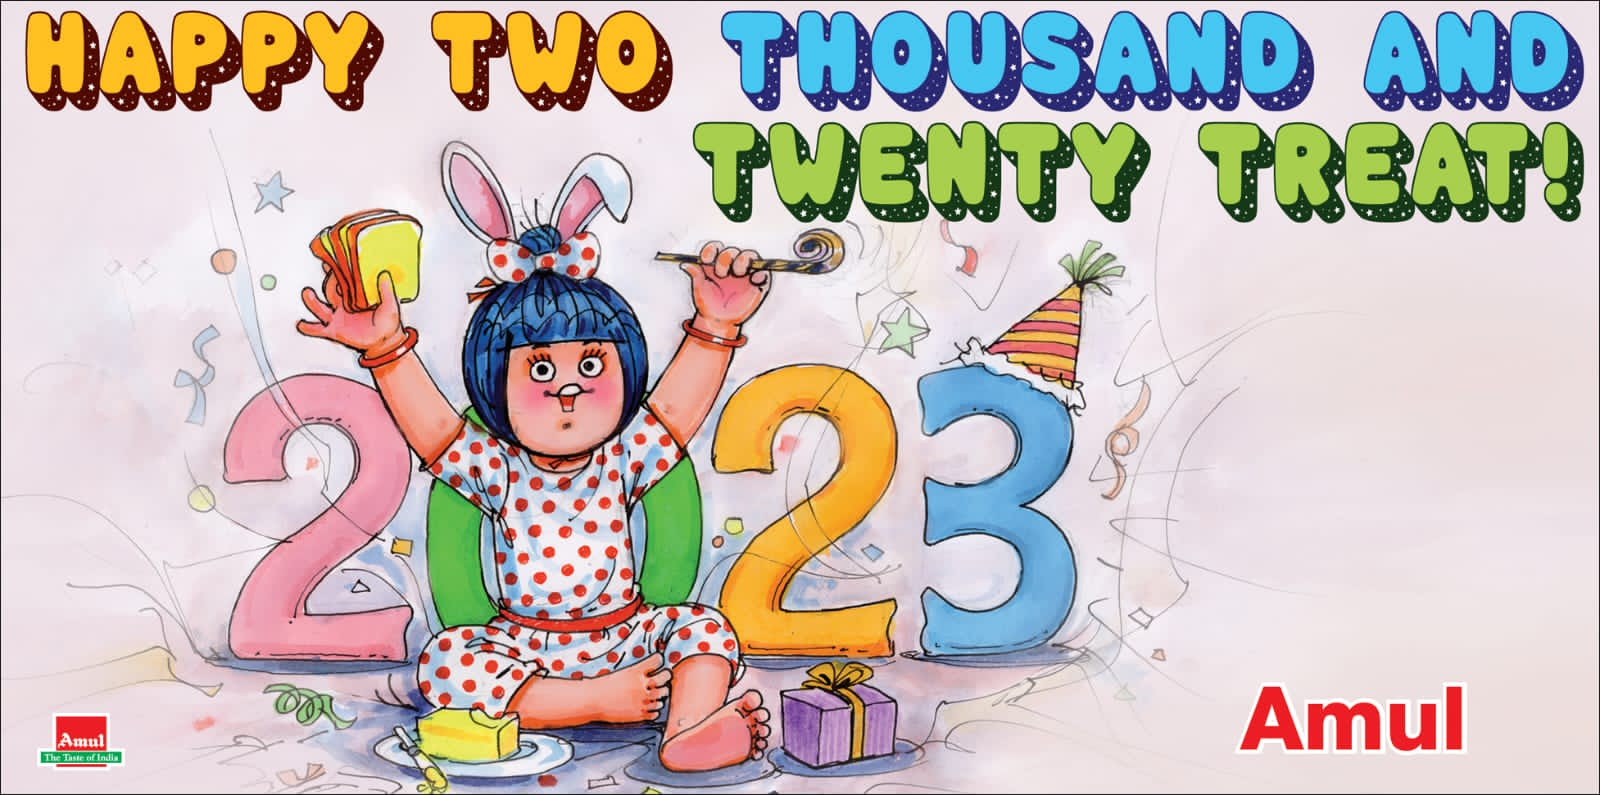 The image showcases Amul's 2023 first image